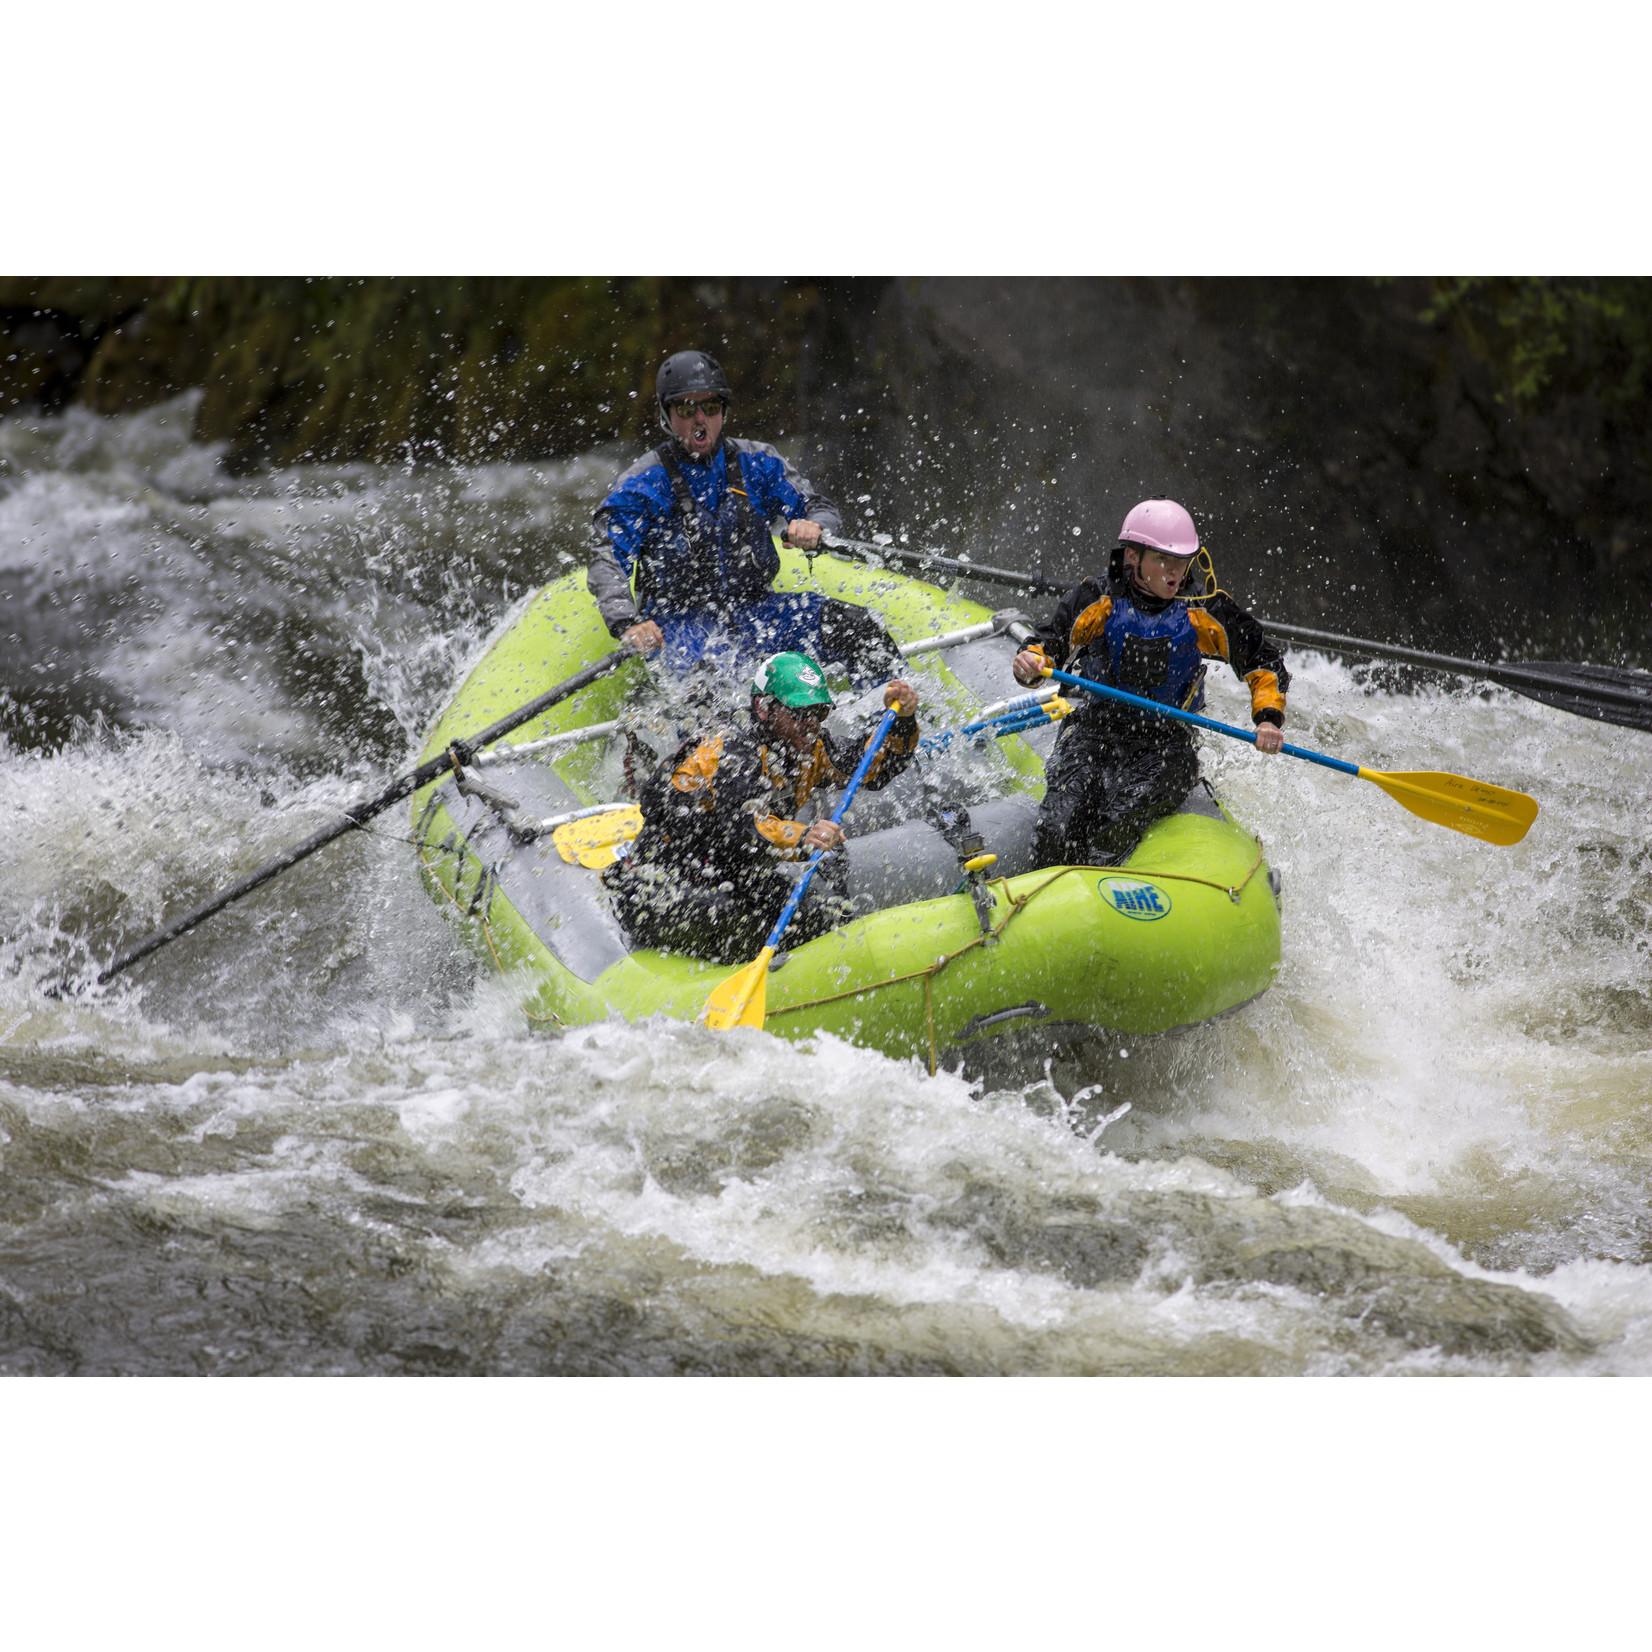 AIRE AIRE 136DD Self-Bailing Raft